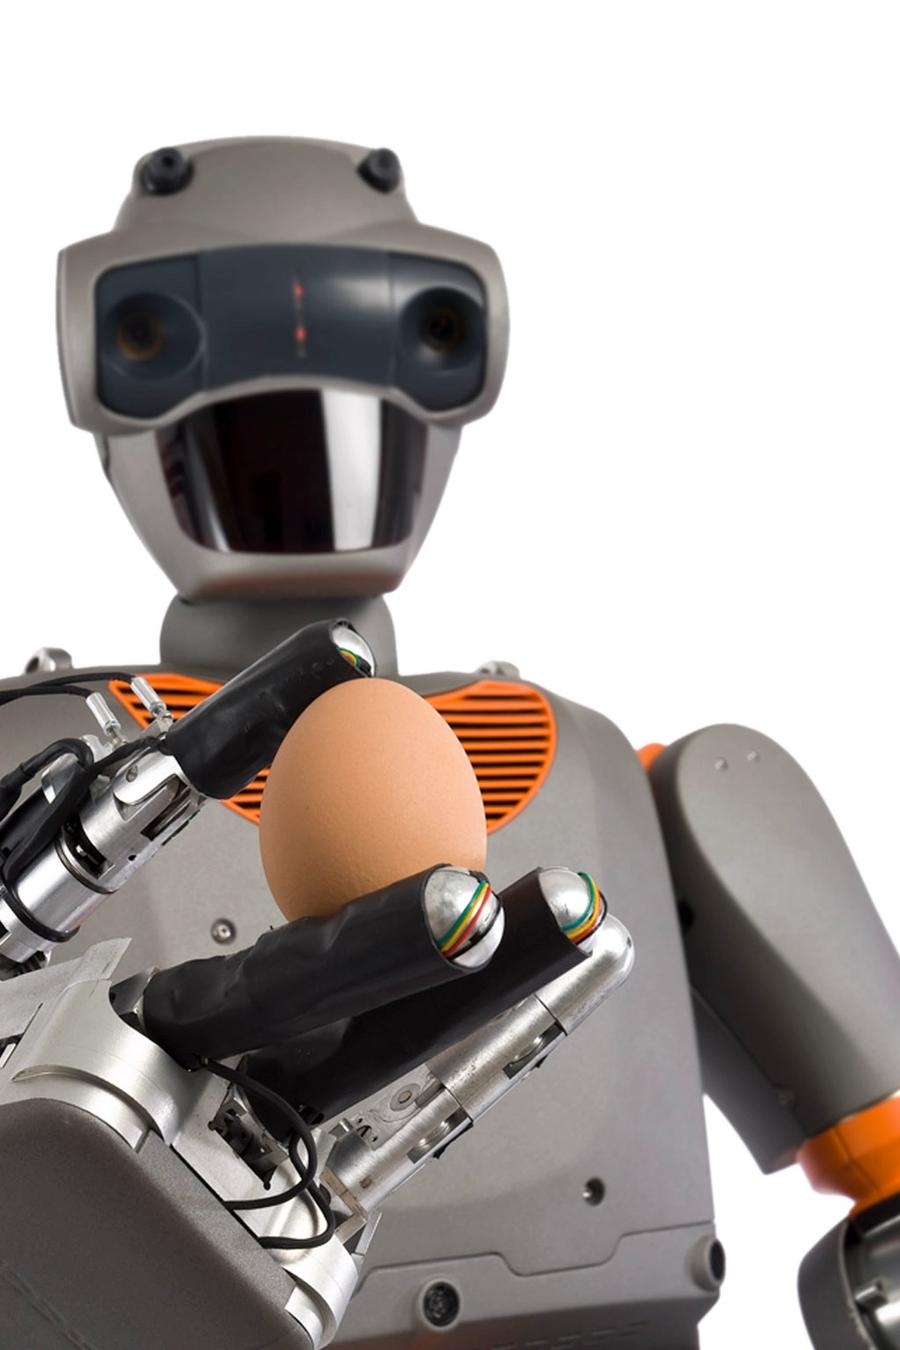 The robot grips an egg between two of its four fingers.